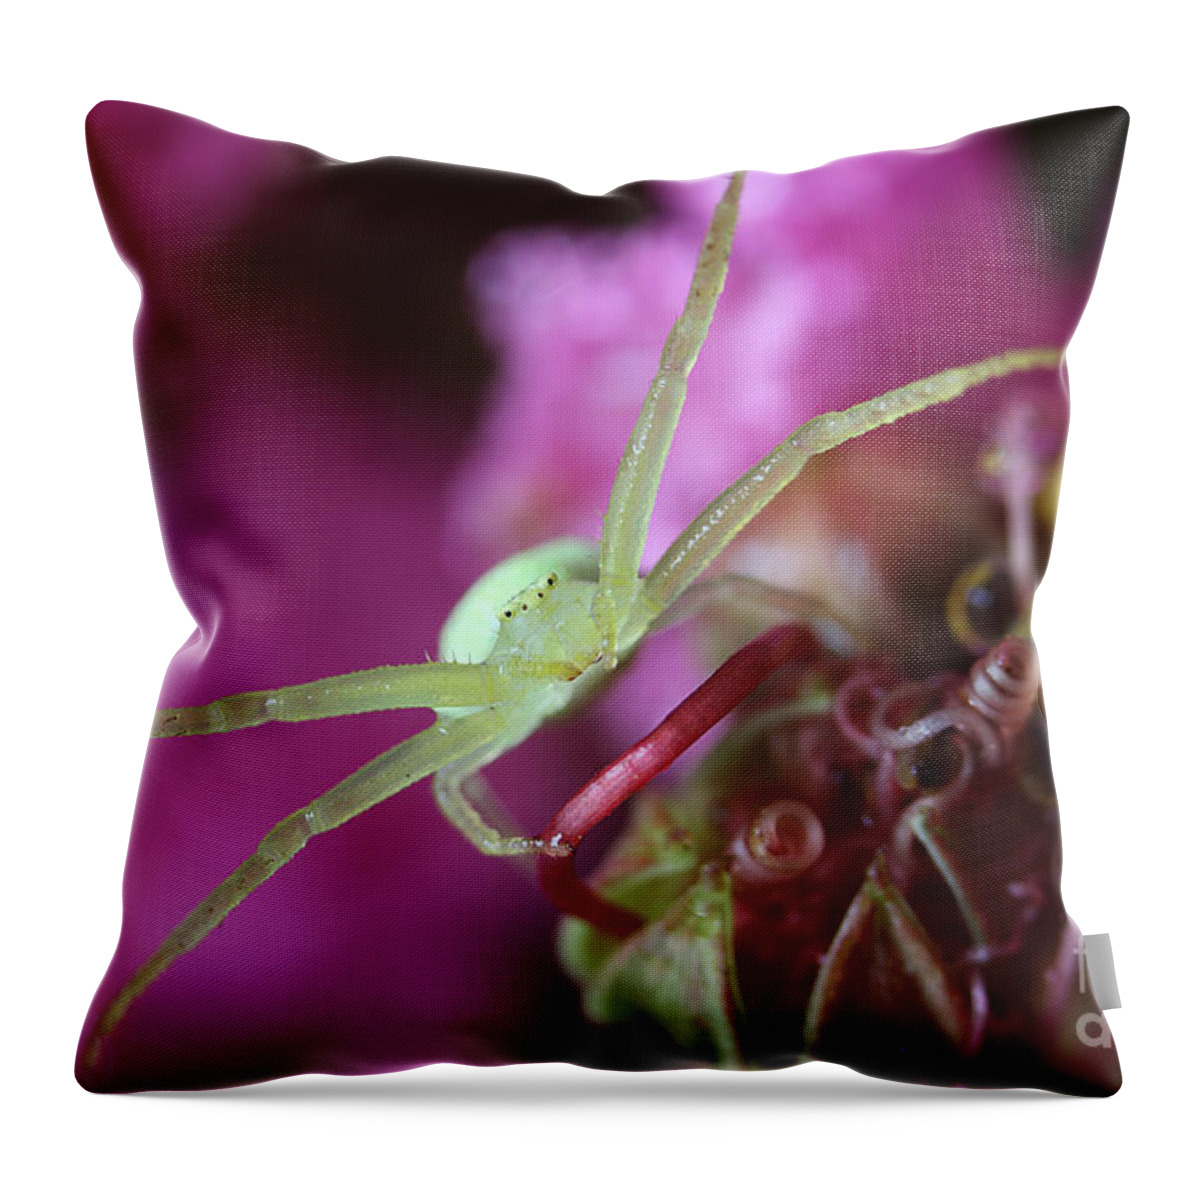 Crab Spider Throw Pillow featuring the photograph Spider In The Crepe Myrtle Tree by Mike Eingle